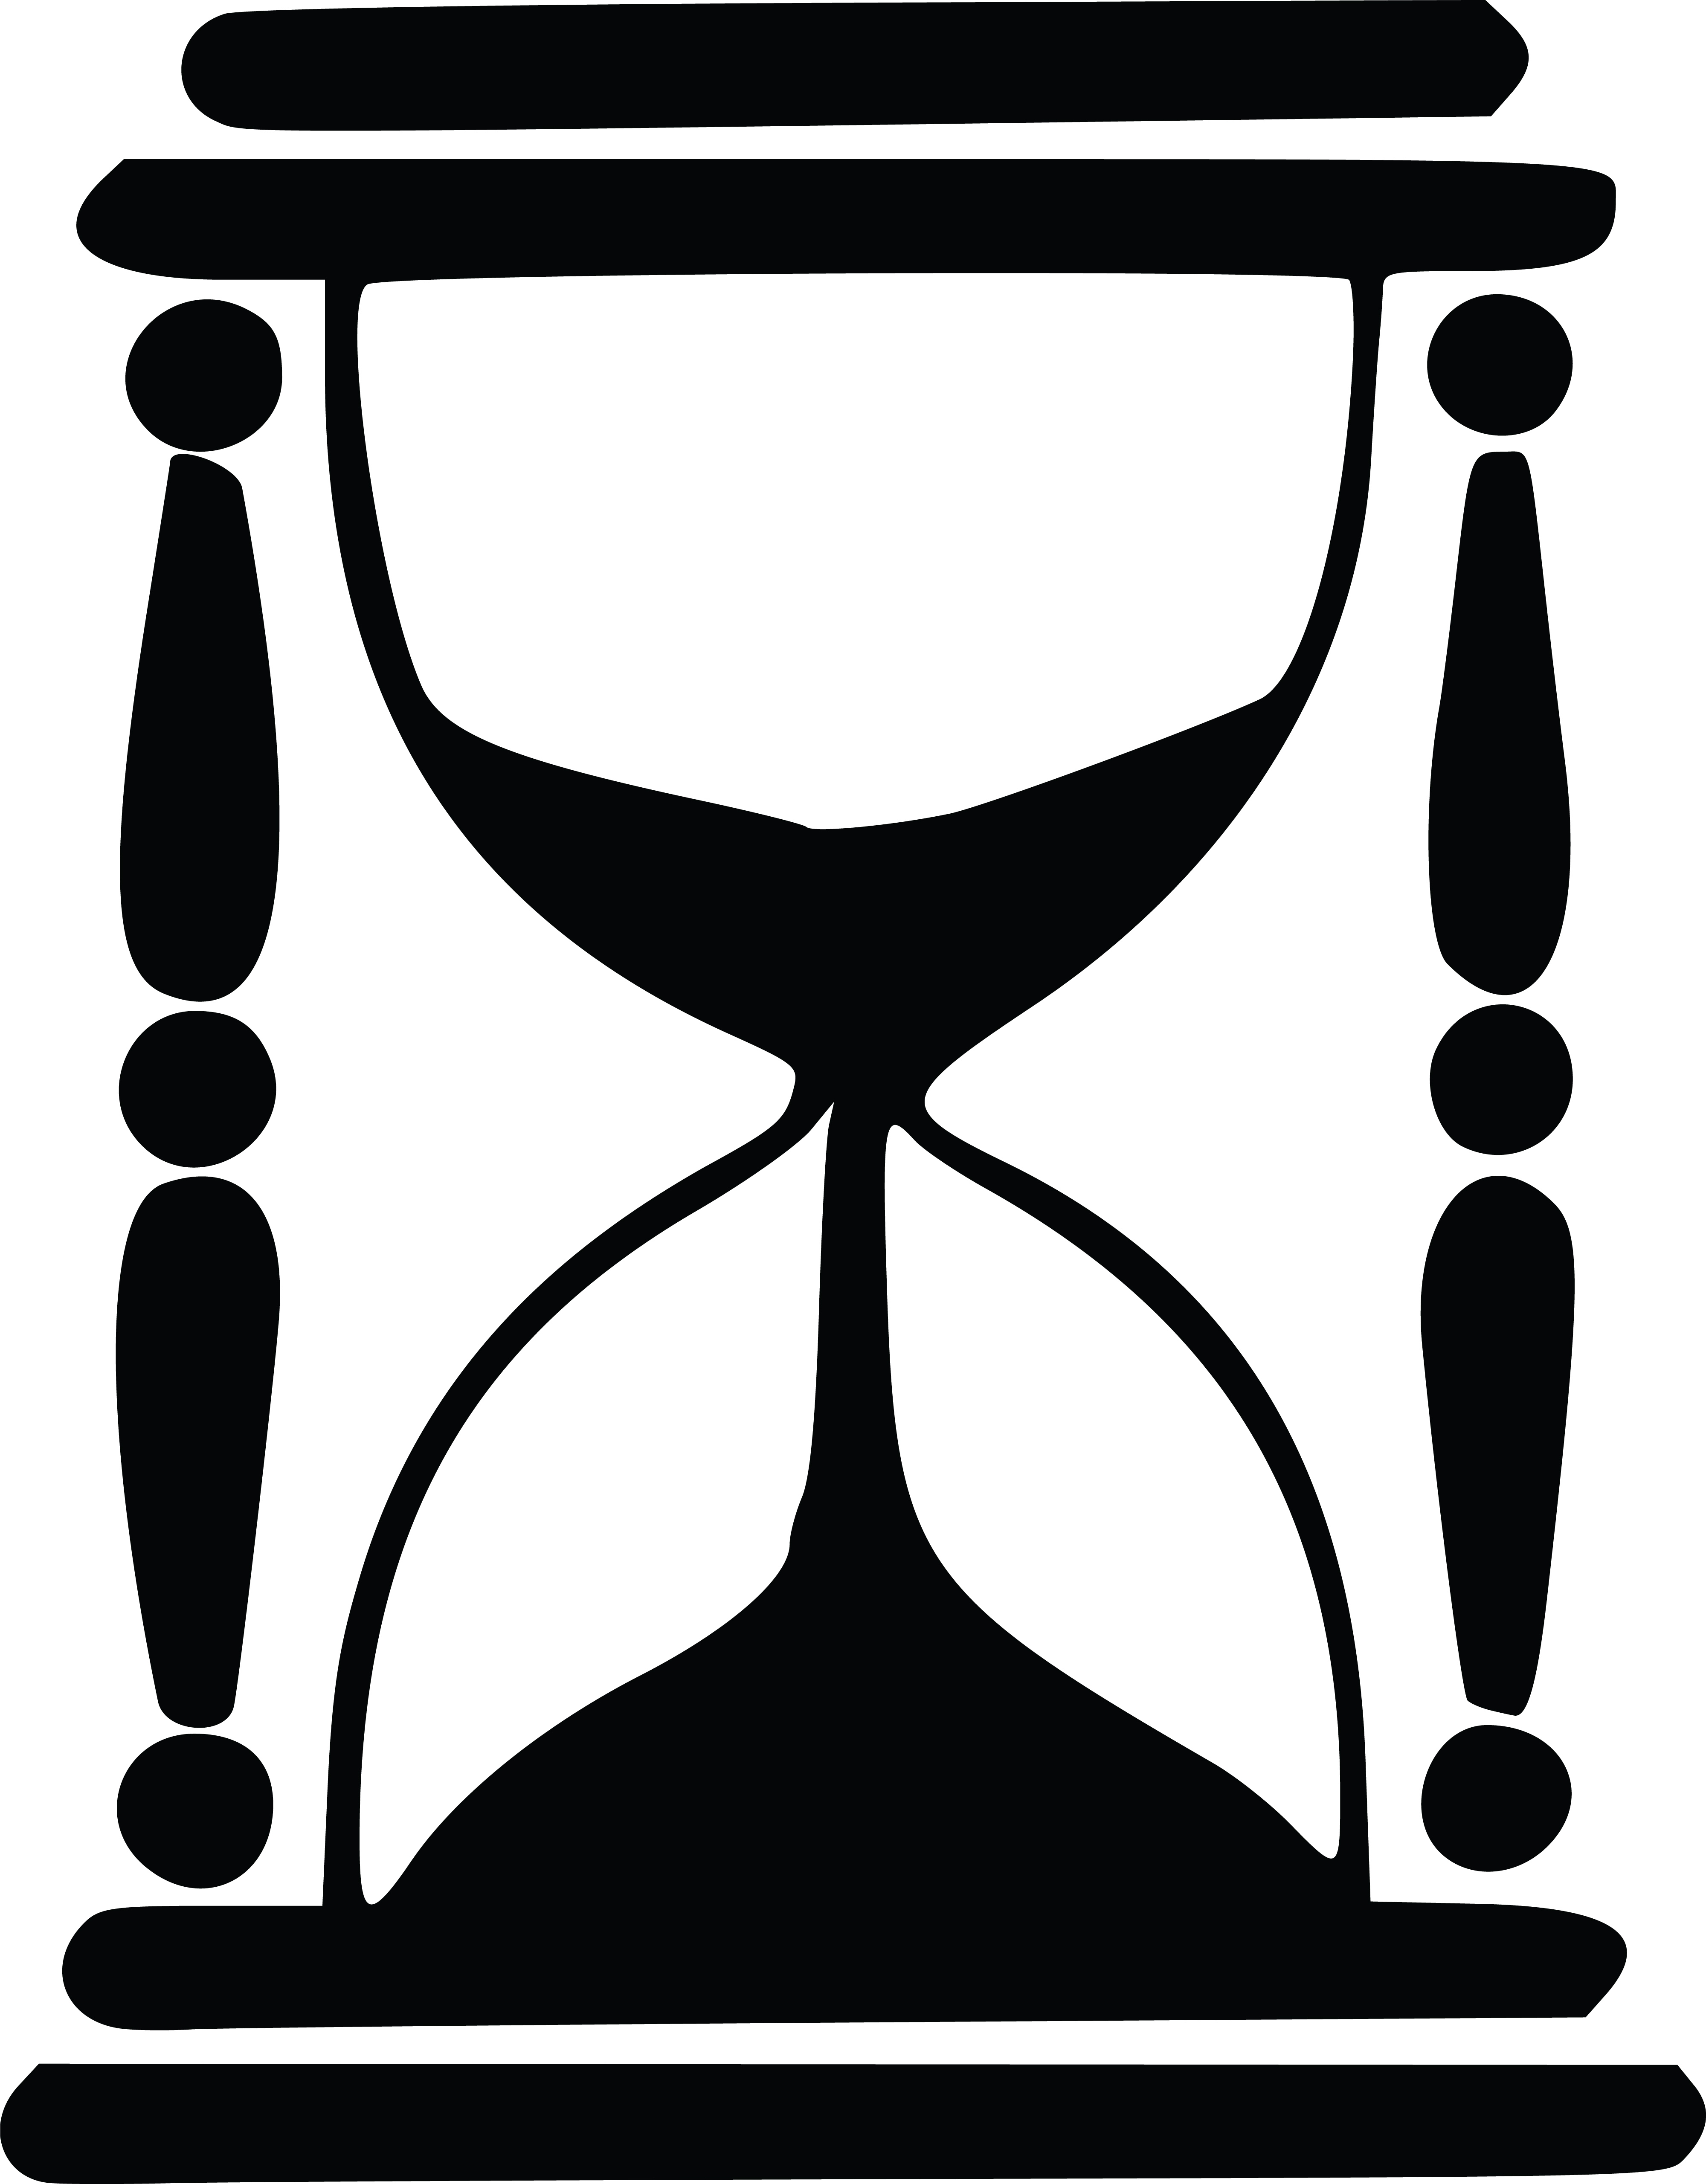 Free Clipart Of An hourglass.